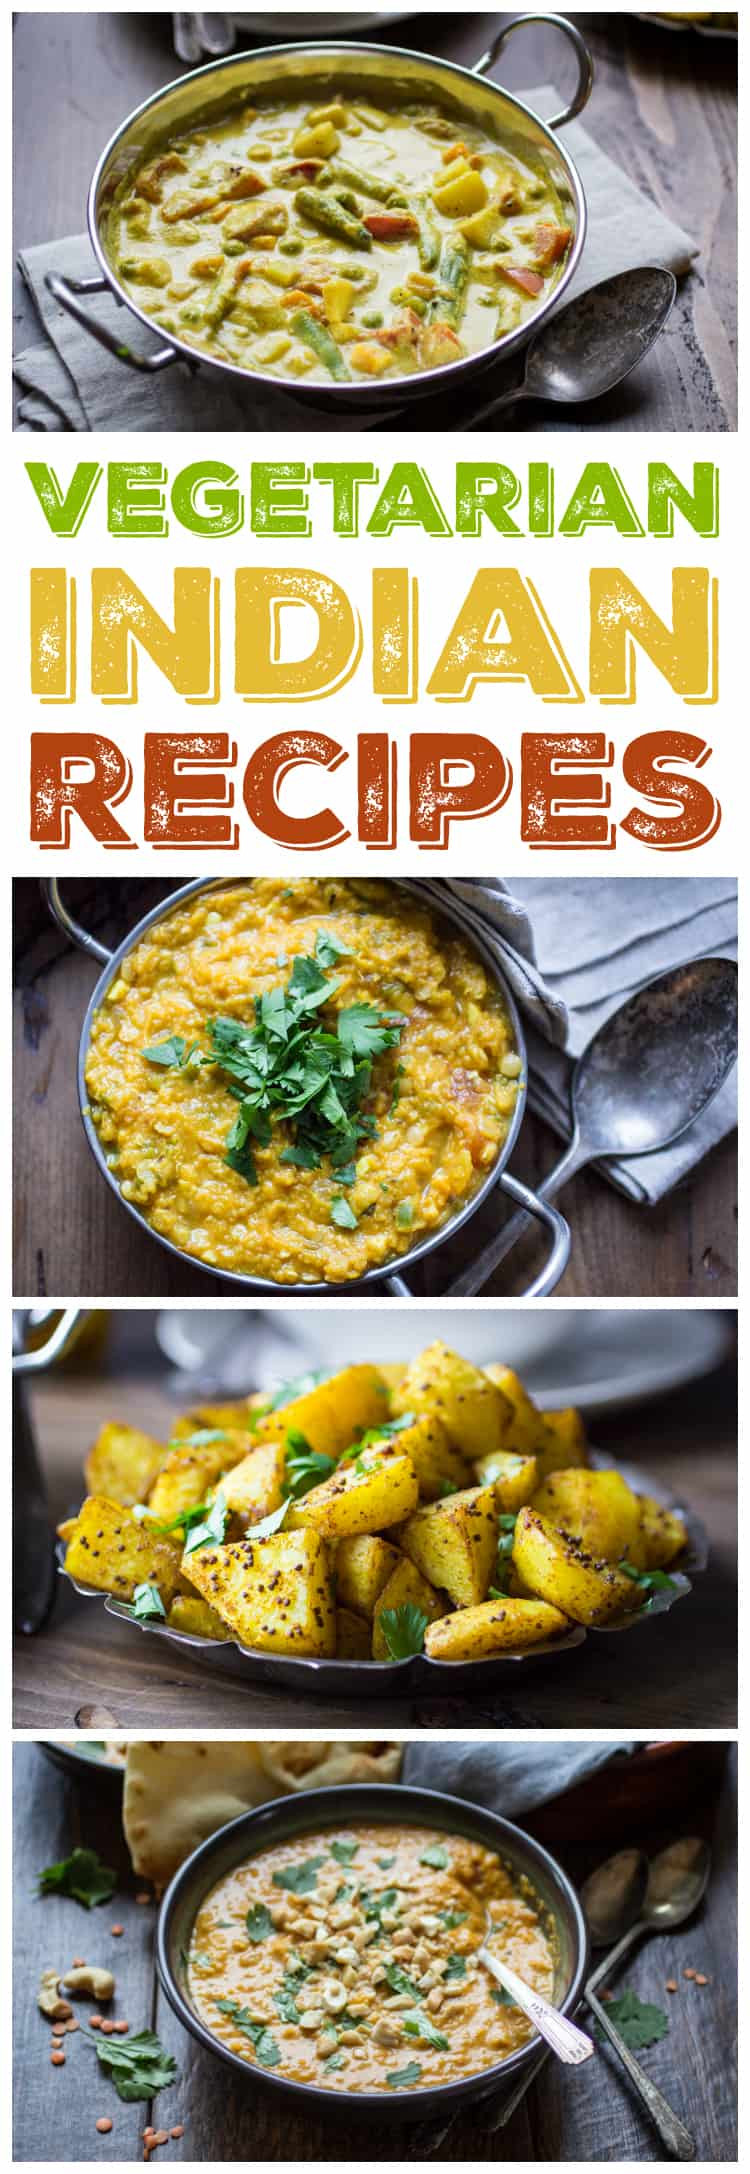 Easy Veg Recipes For Dinner Indian
 10 Ve arian Indian Recipes to Make Again and Again The